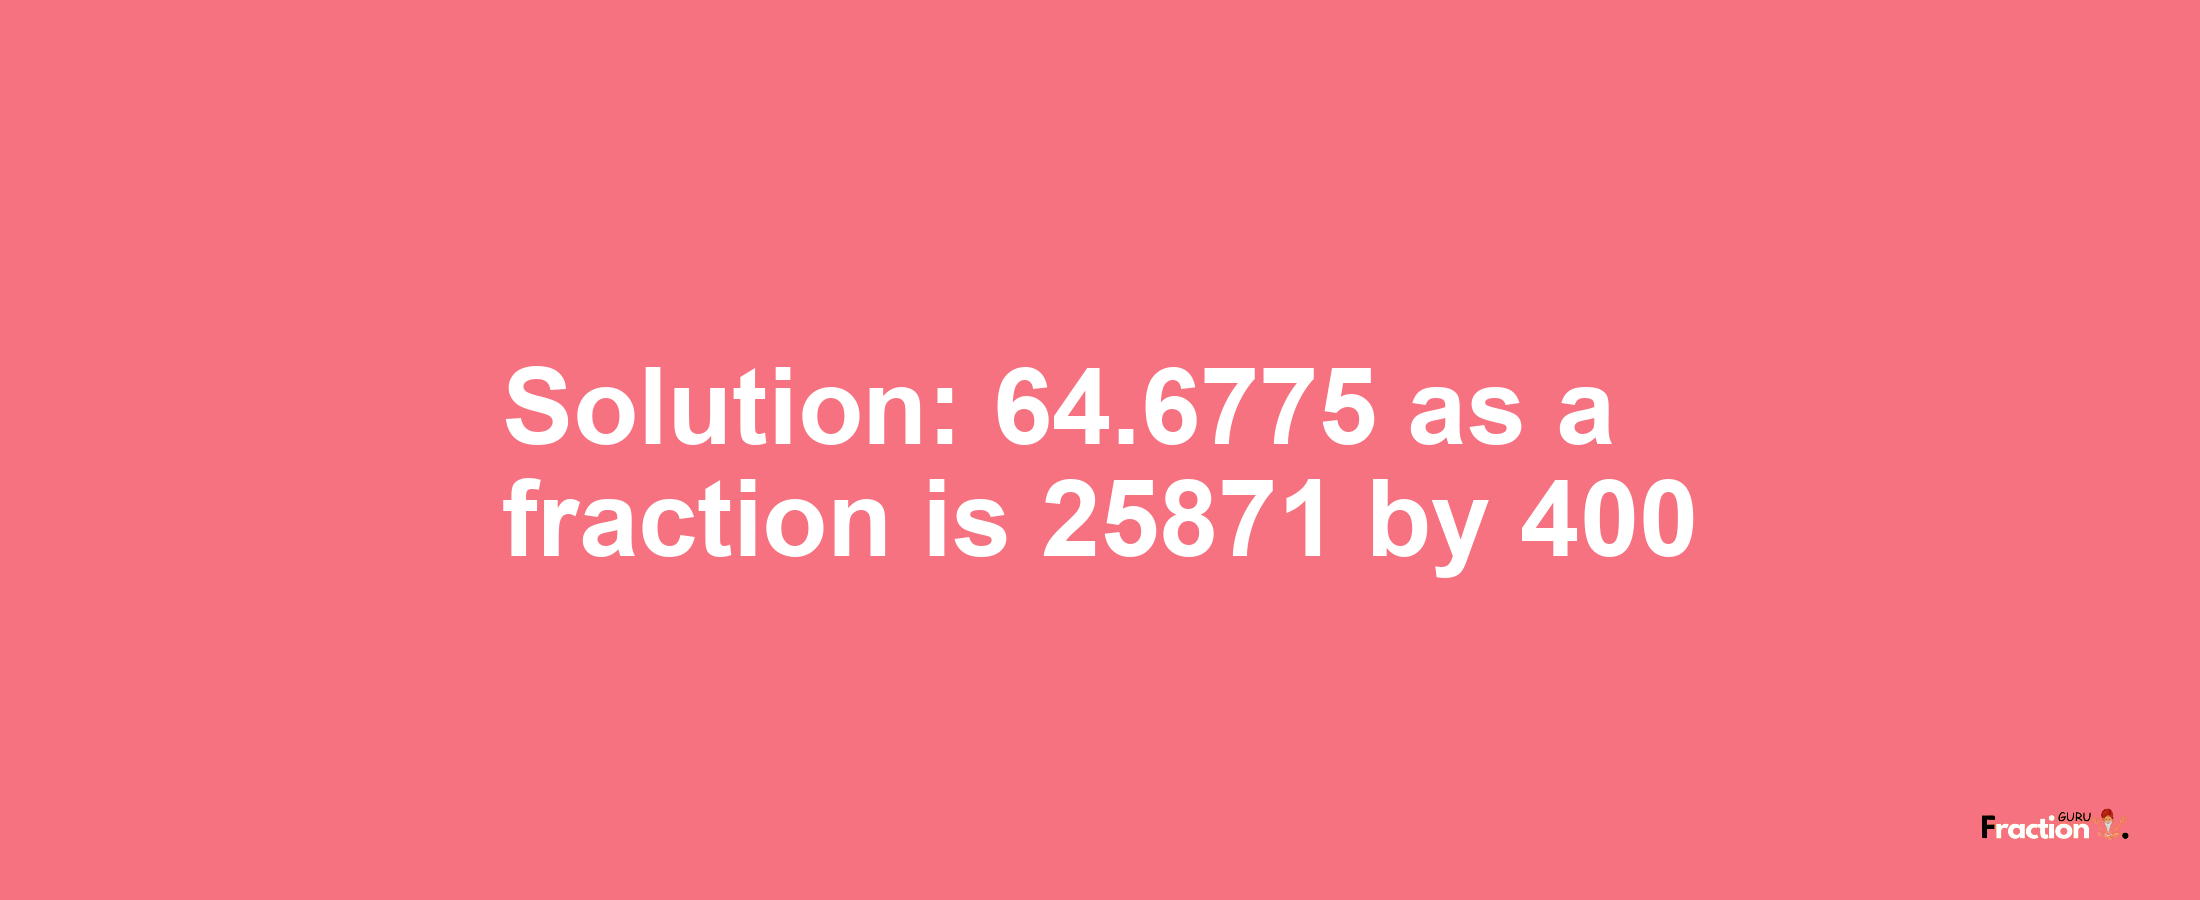 Solution:64.6775 as a fraction is 25871/400